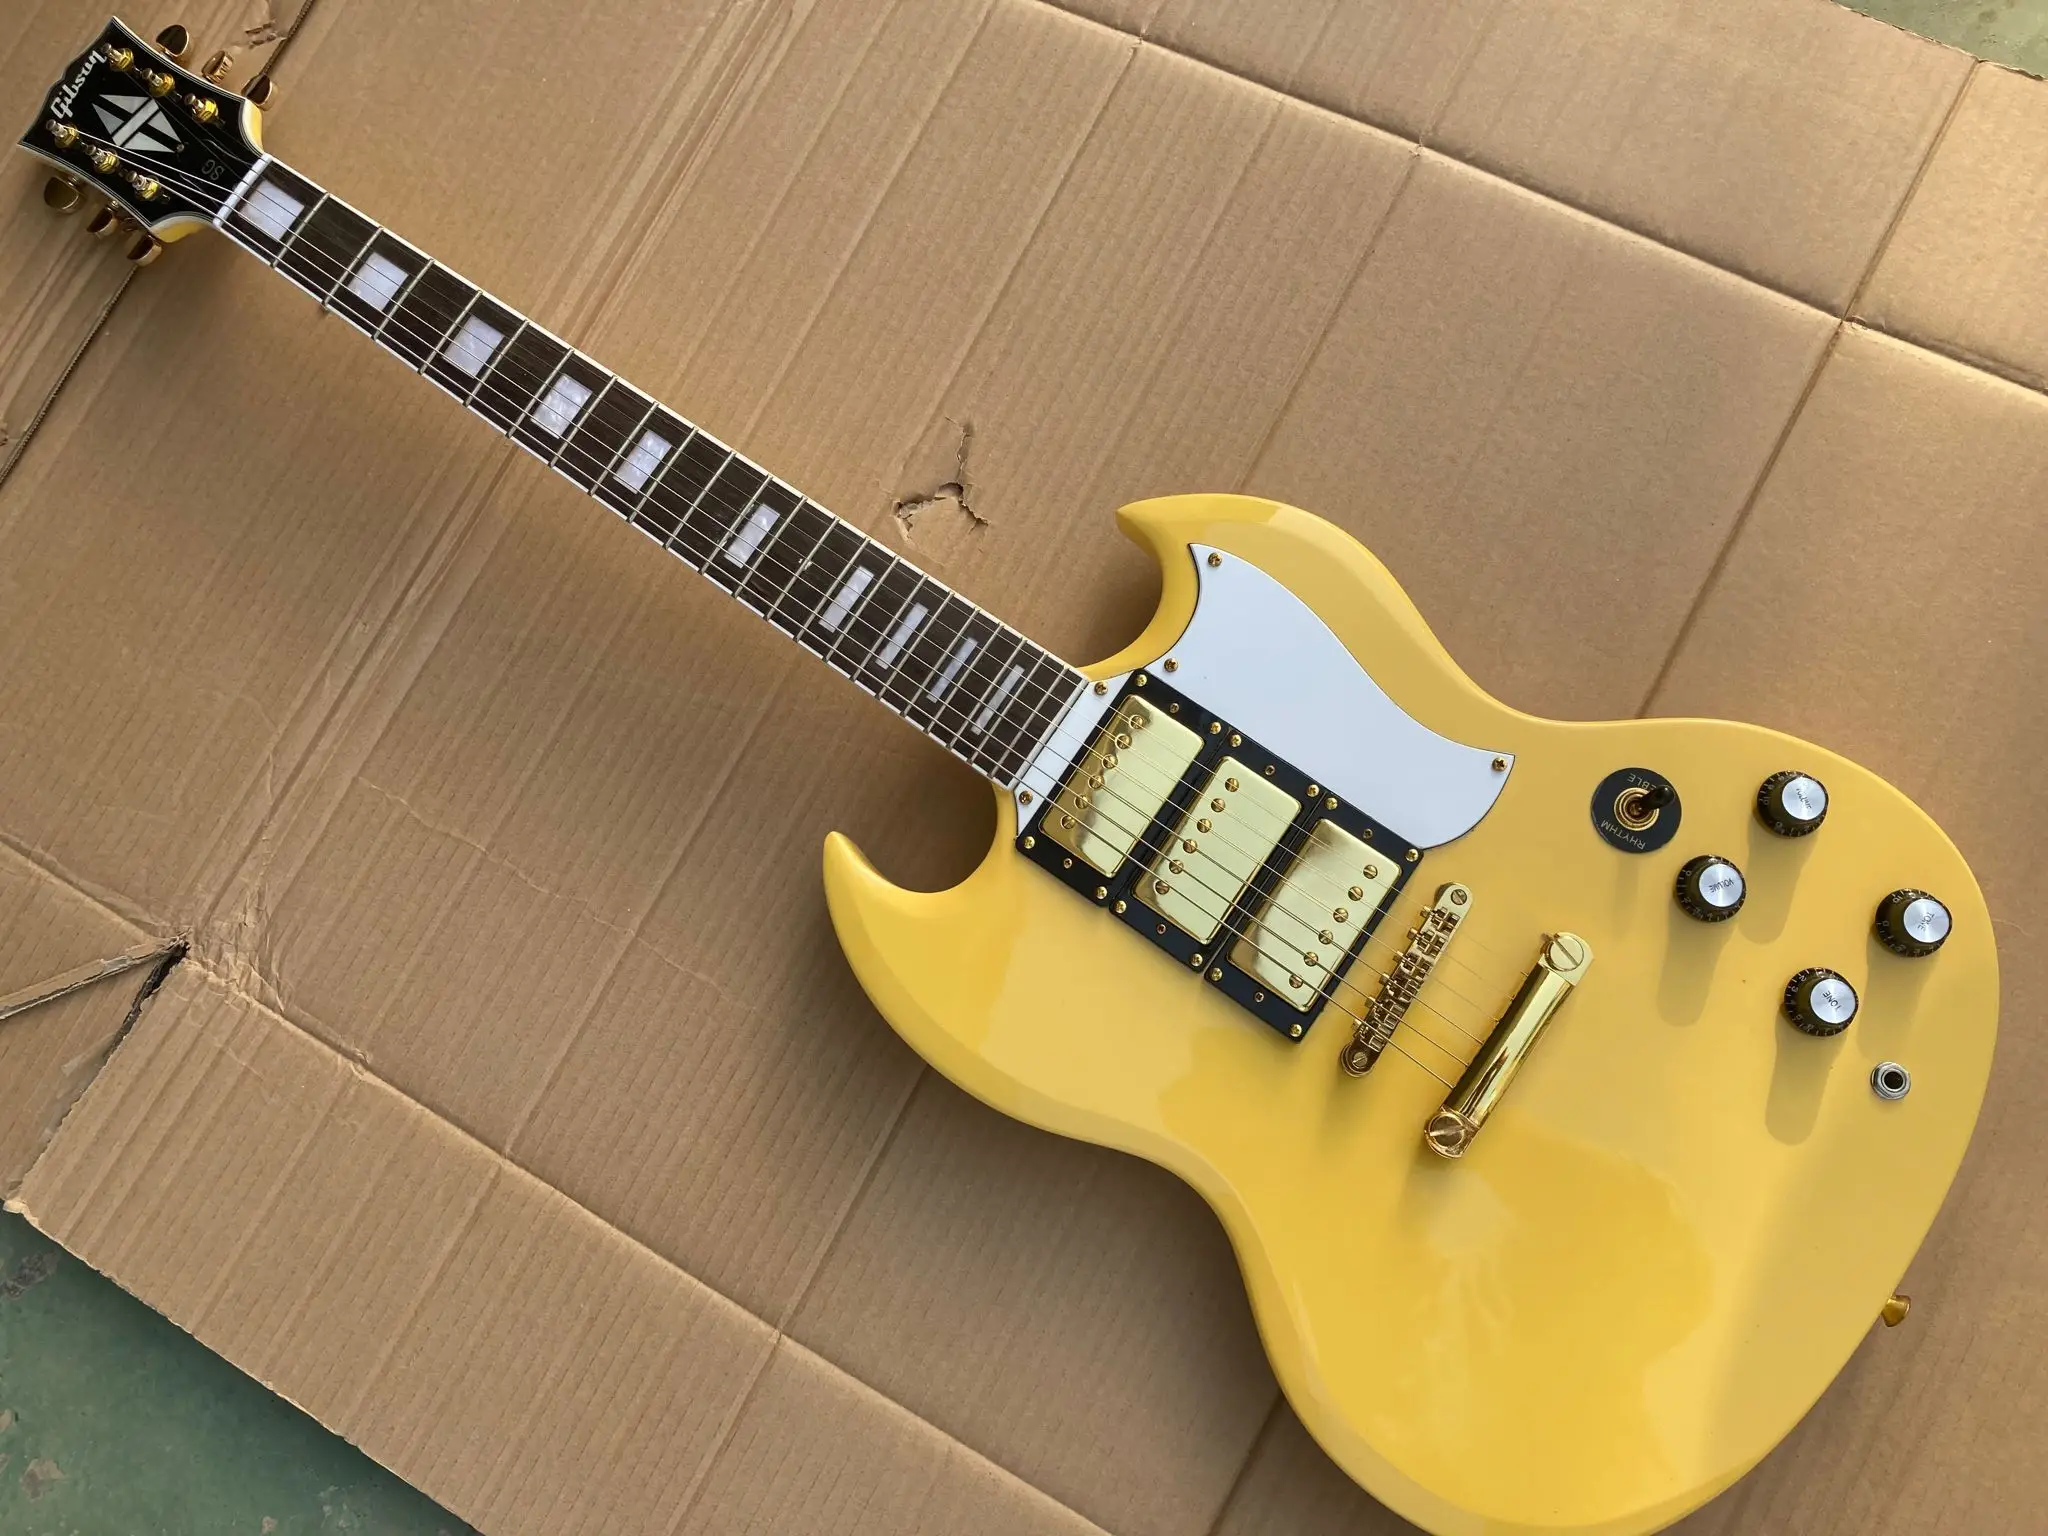 

Send in 3 days Factory custom shop Newest three pickups White tobacco sg-400 electric guitar in stock